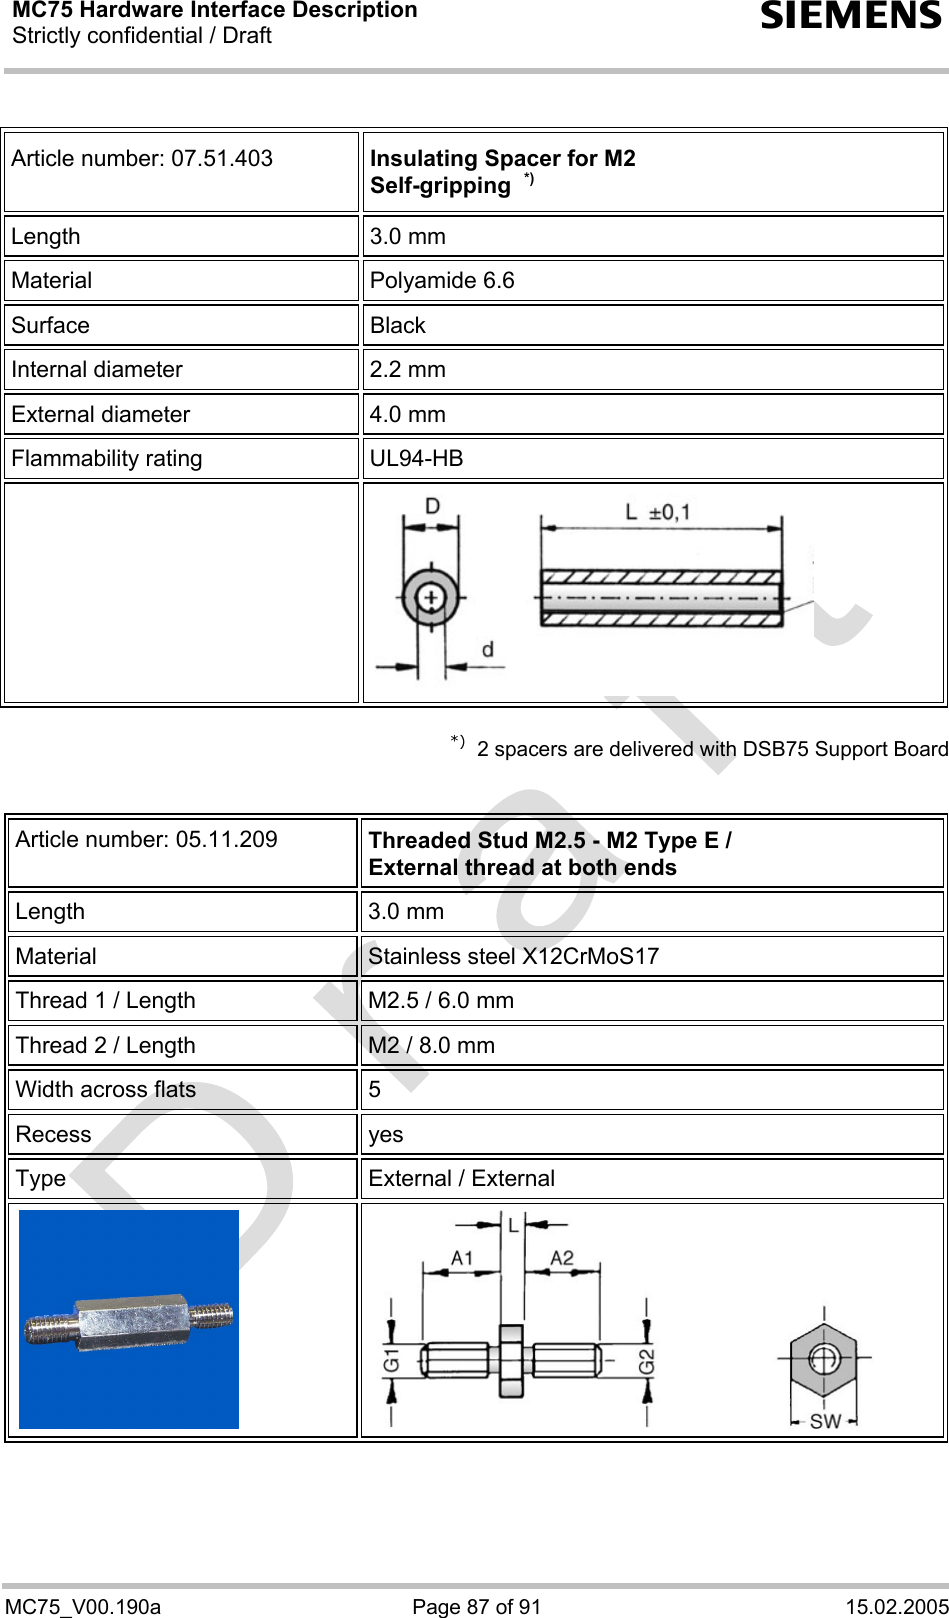 MC75 Hardware Interface Description Strictly confidential / Draft  s MC75_V00.190a  Page 87 of 91  15.02.2005  Article number: 07.51.403  Insulating Spacer for M2 Self-gripping  *) Length 3.0 mm Material Polyamide 6.6 Surface Black Internal diameter  2.2 mm External diameter  4.0 mm Flammability rating  UL94-HB    *)  2 spacers are delivered with DSB75 Support Board   Article number: 05.11.209   Threaded Stud M2.5 - M2 Type E / External thread at both ends Length 3.0 mm Material  Stainless steel X12CrMoS17 Thread 1 / Length  M2.5 / 6.0 mm Thread 2 / Length  M2 / 8.0 mm Width across flats  5  Recess yes Type  External / External     